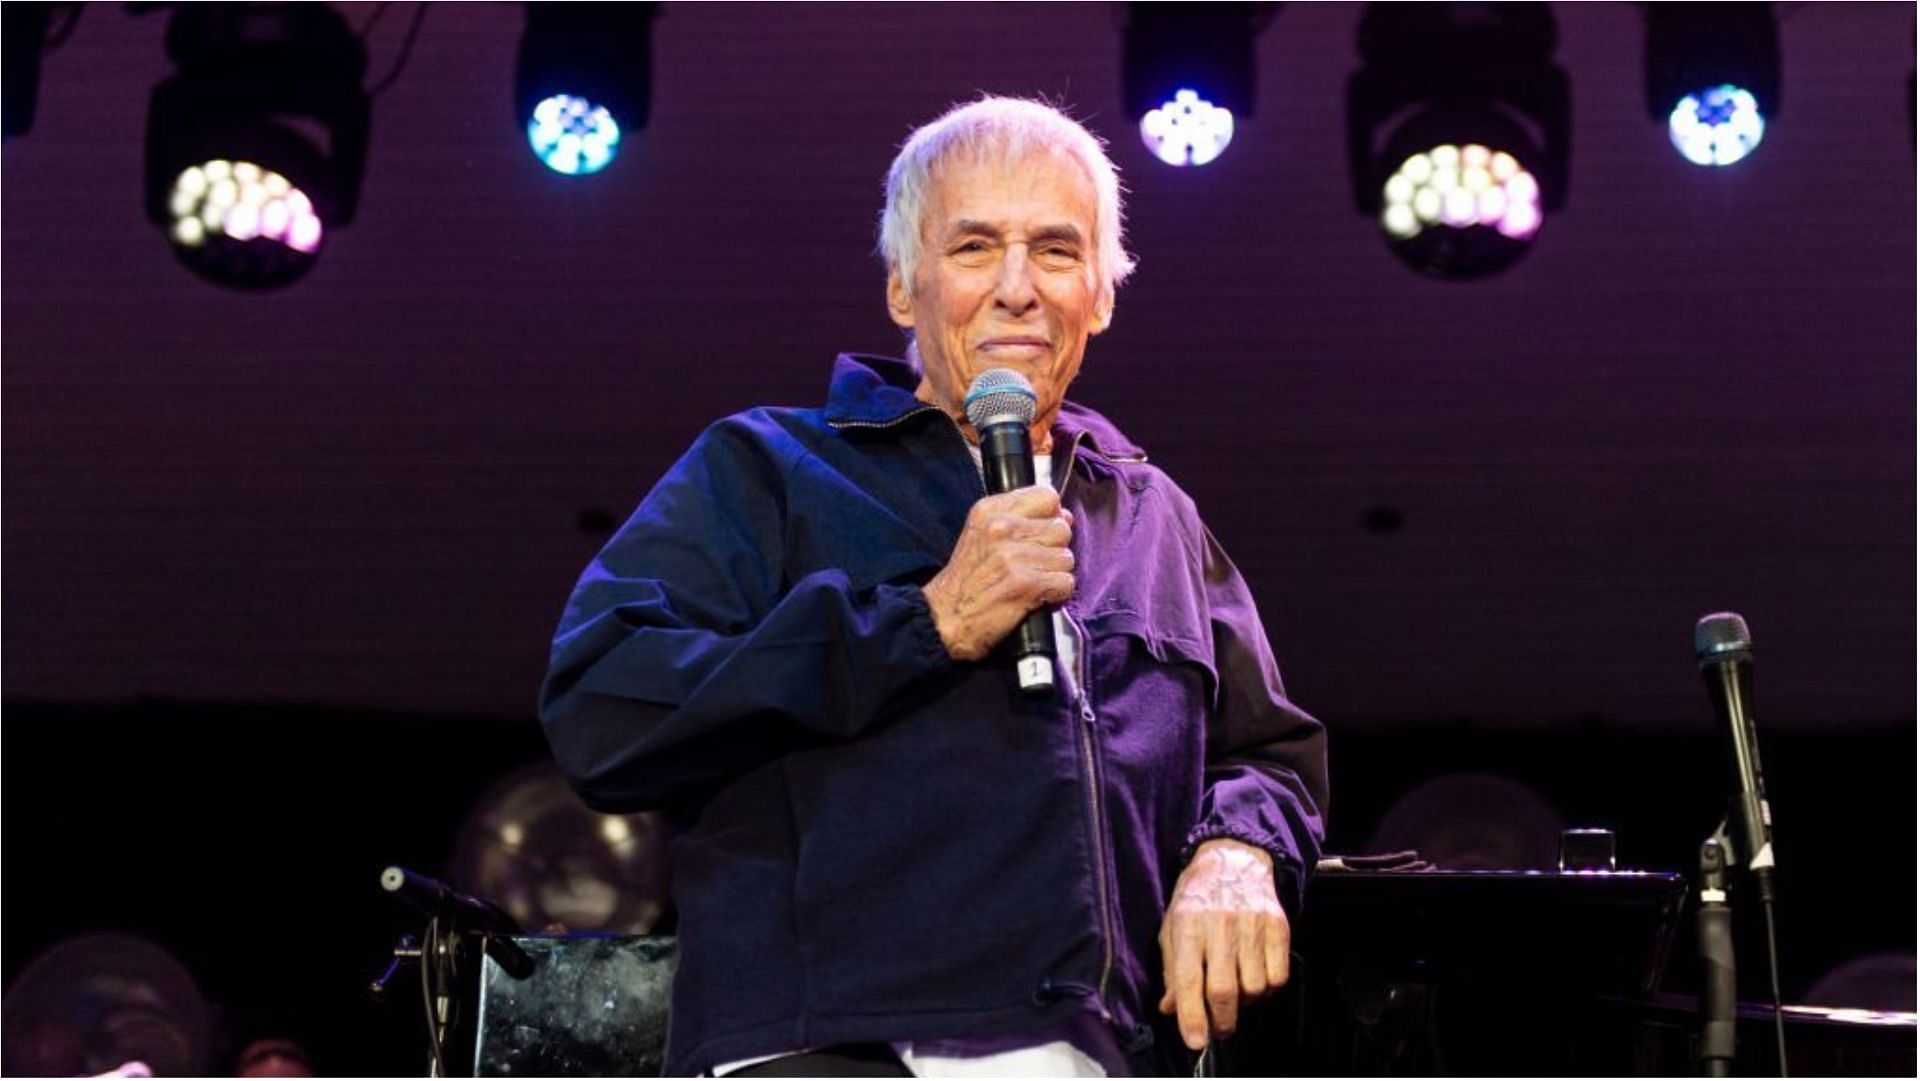 Burt Bacharach earned a lot from his career in the music industry (Image via Roberto Ricciuti/Getty Images)